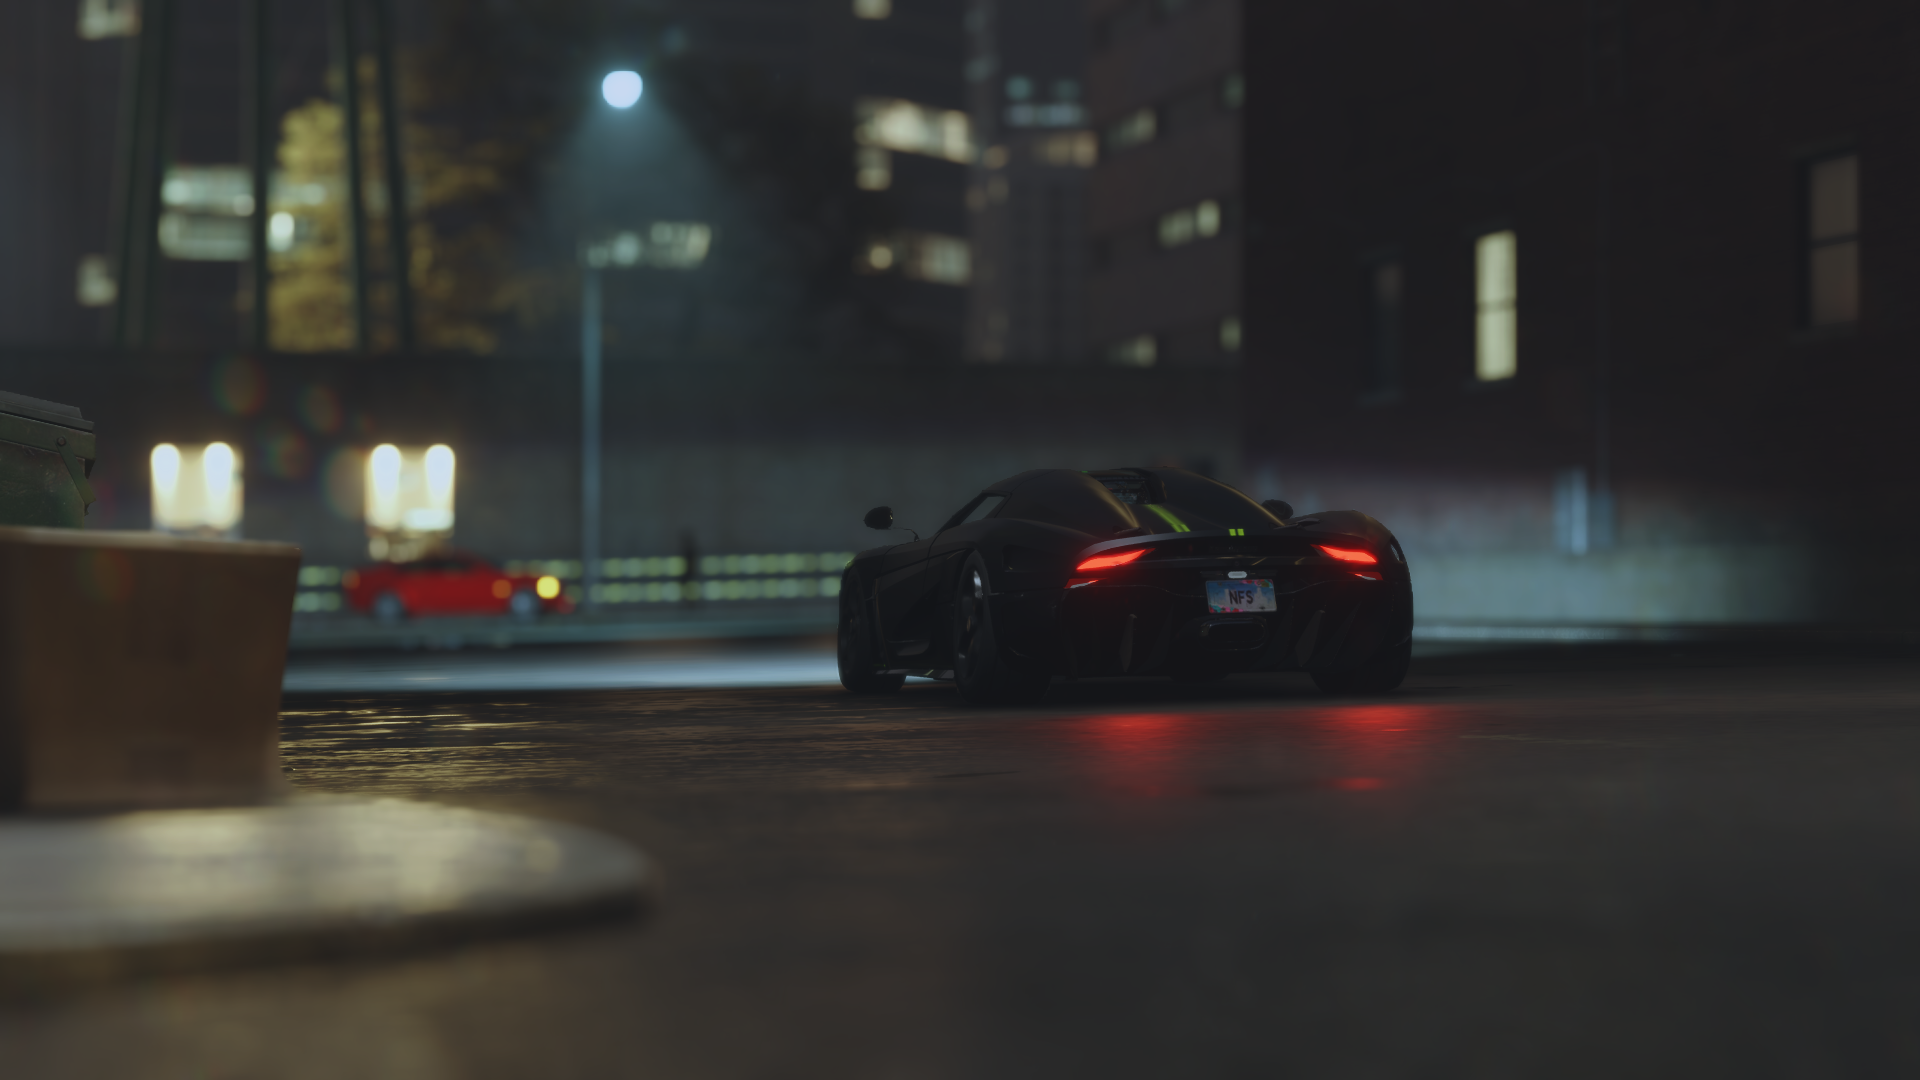 General 1920x1080 Need for Speed car CGI taillights licence plates night street light rear view Koenigsegg